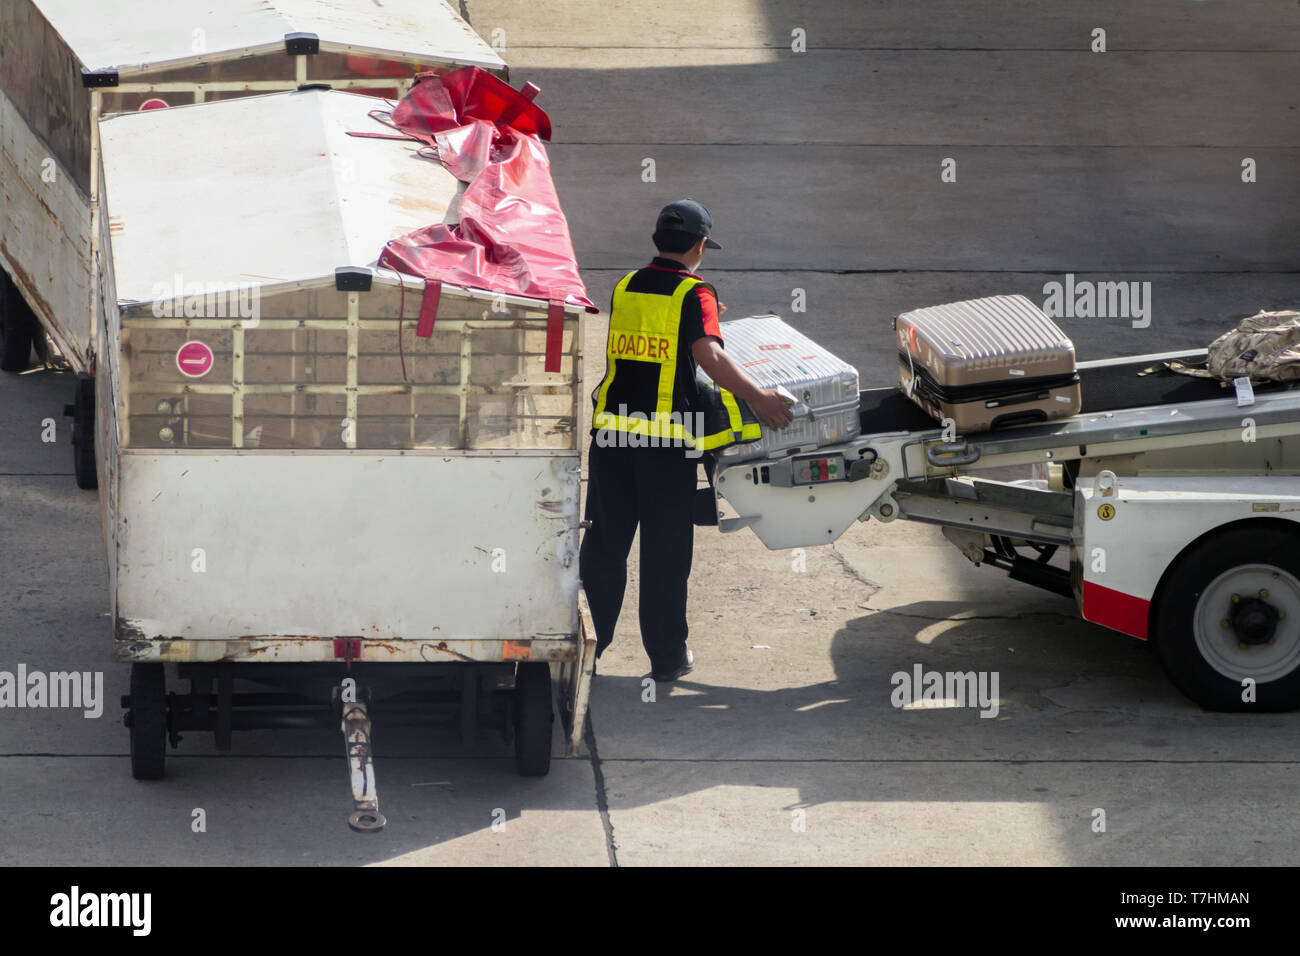 asian man loader lifting up the luggage to conveyor belt of the trailer to loading passenger baggage to the airplane on the runway at the airport. tra Stock Photo